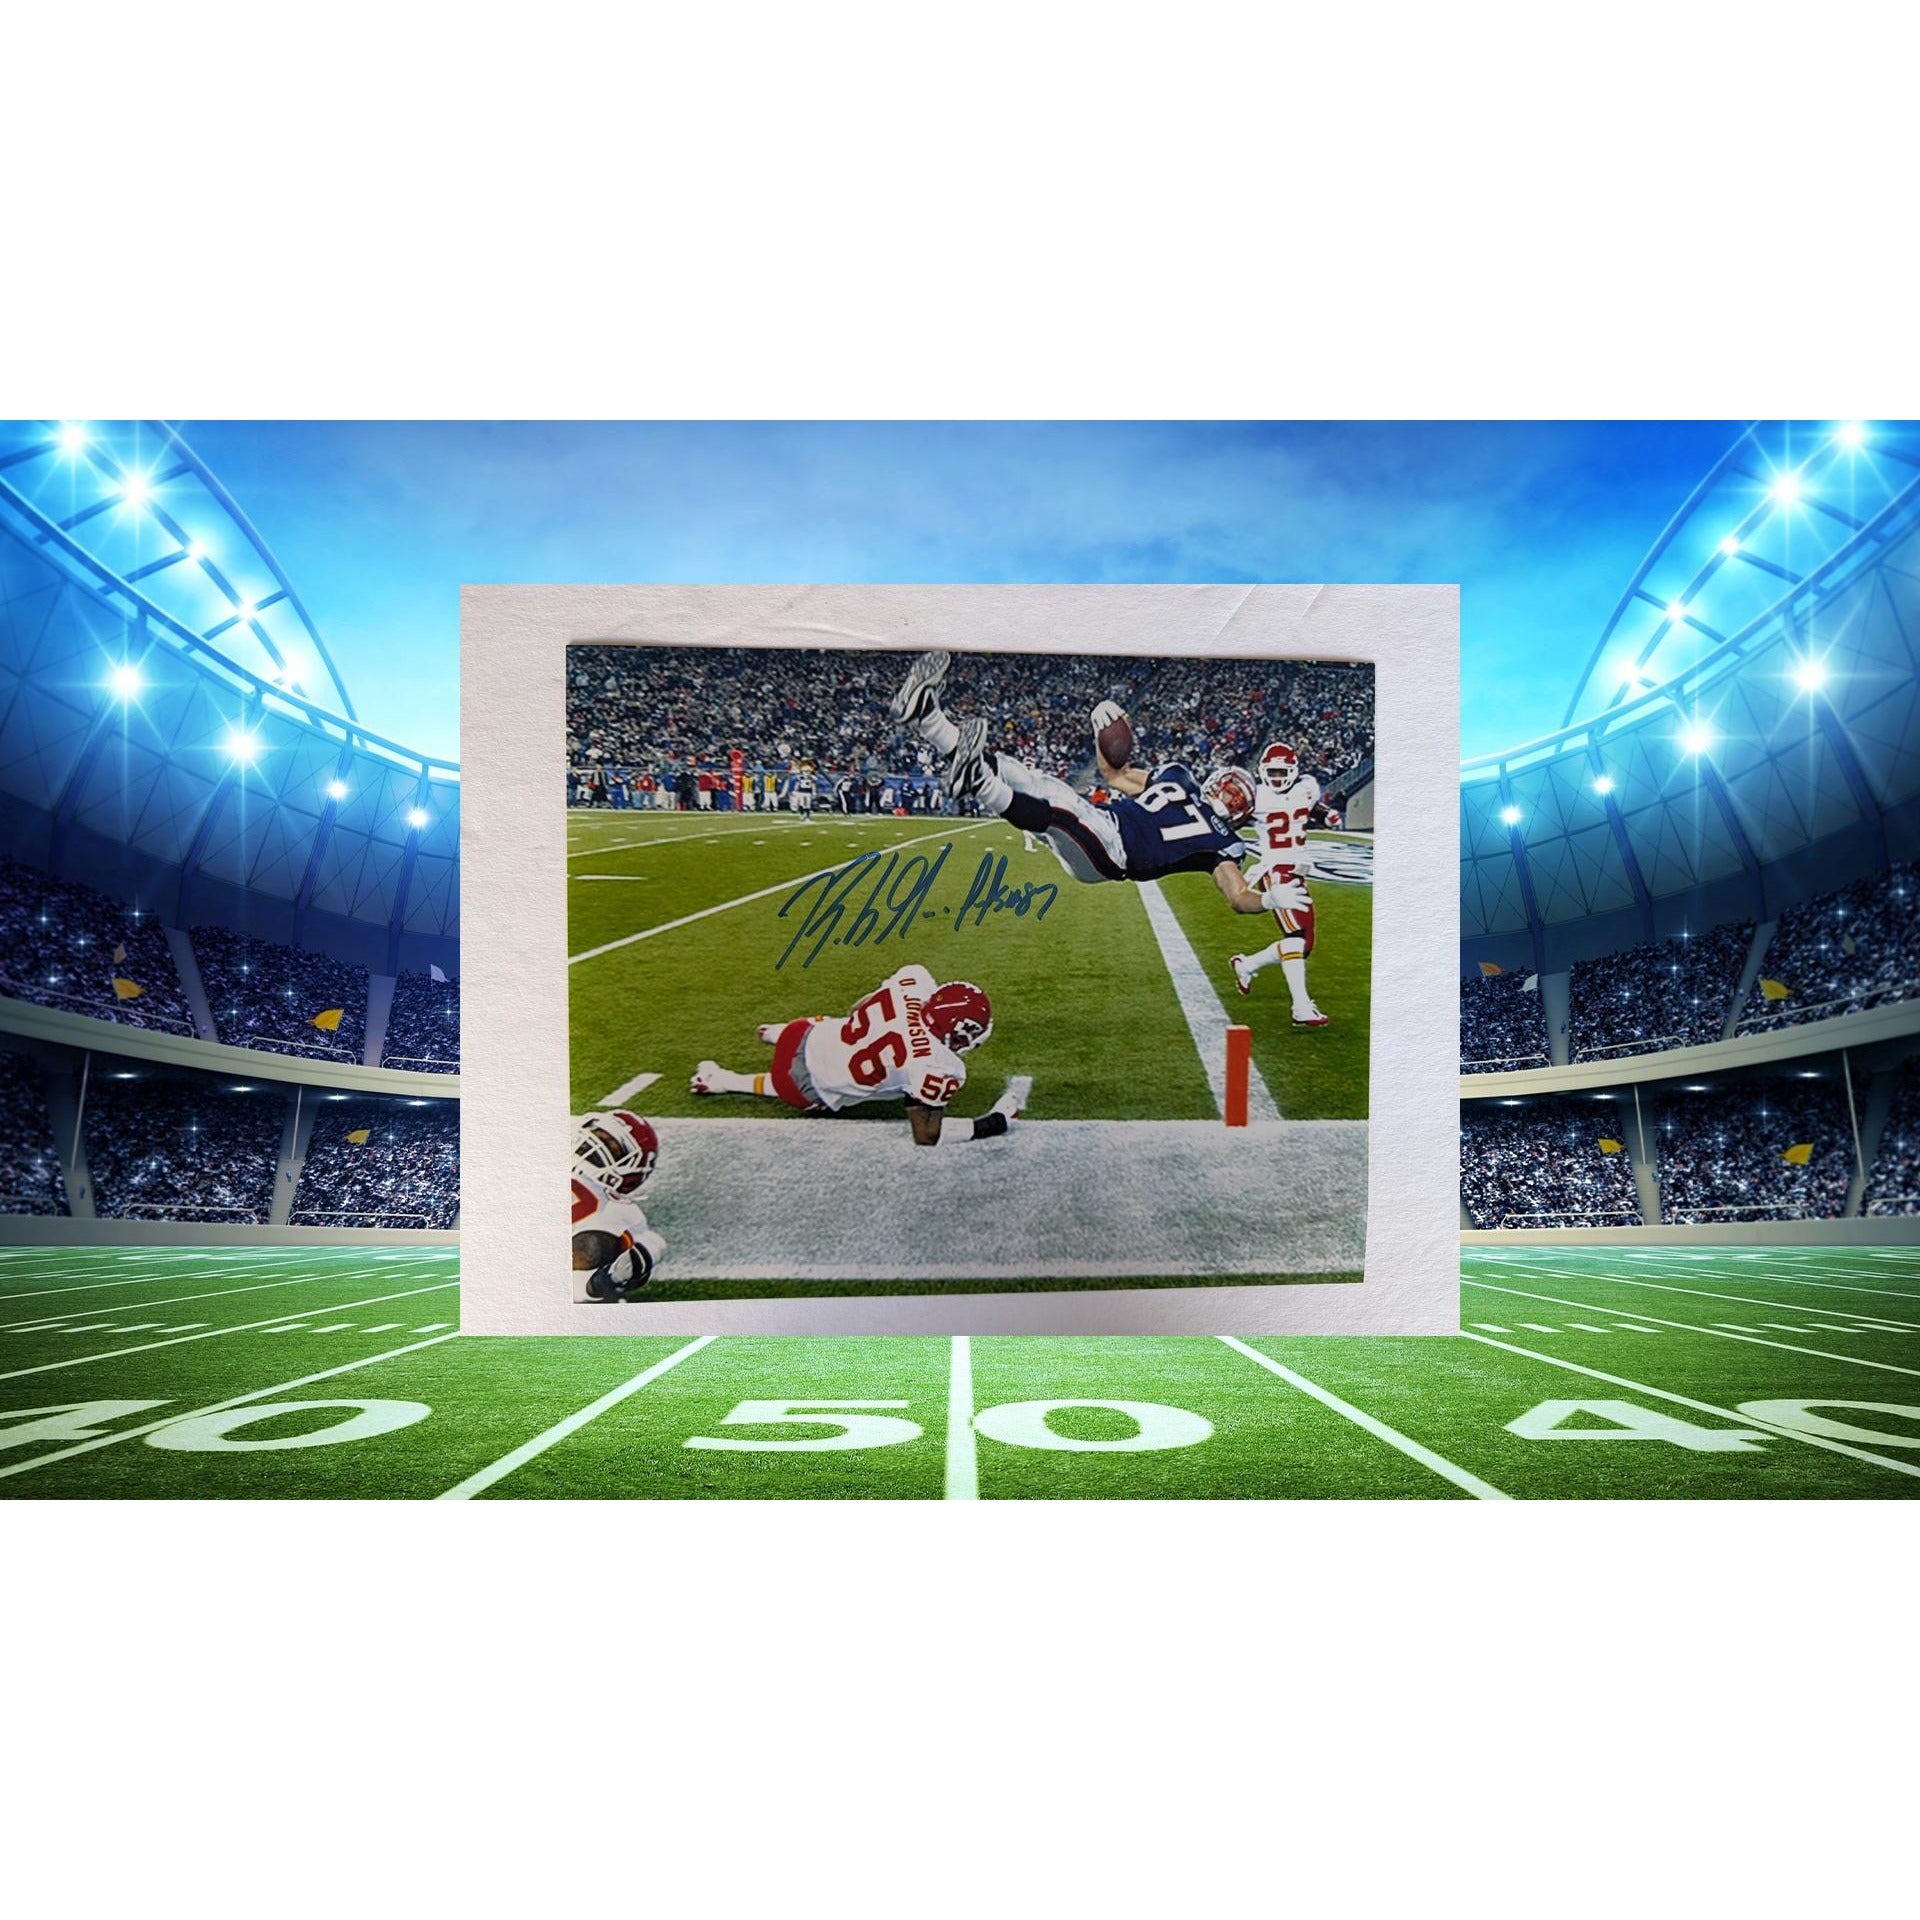 Rob Gronkowski New England Patriots future NFL Hall of Famer 8x10 photo signed with proof